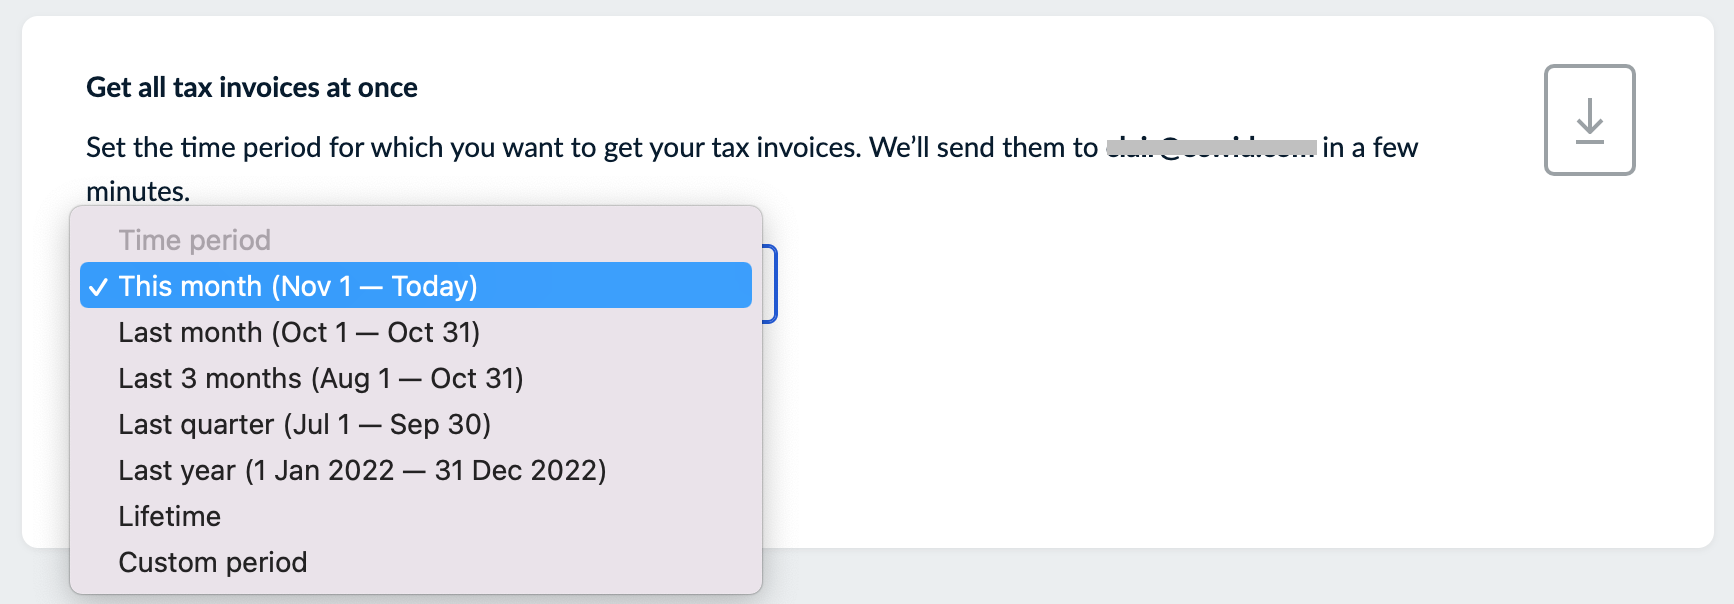 Getting tax invoices.png